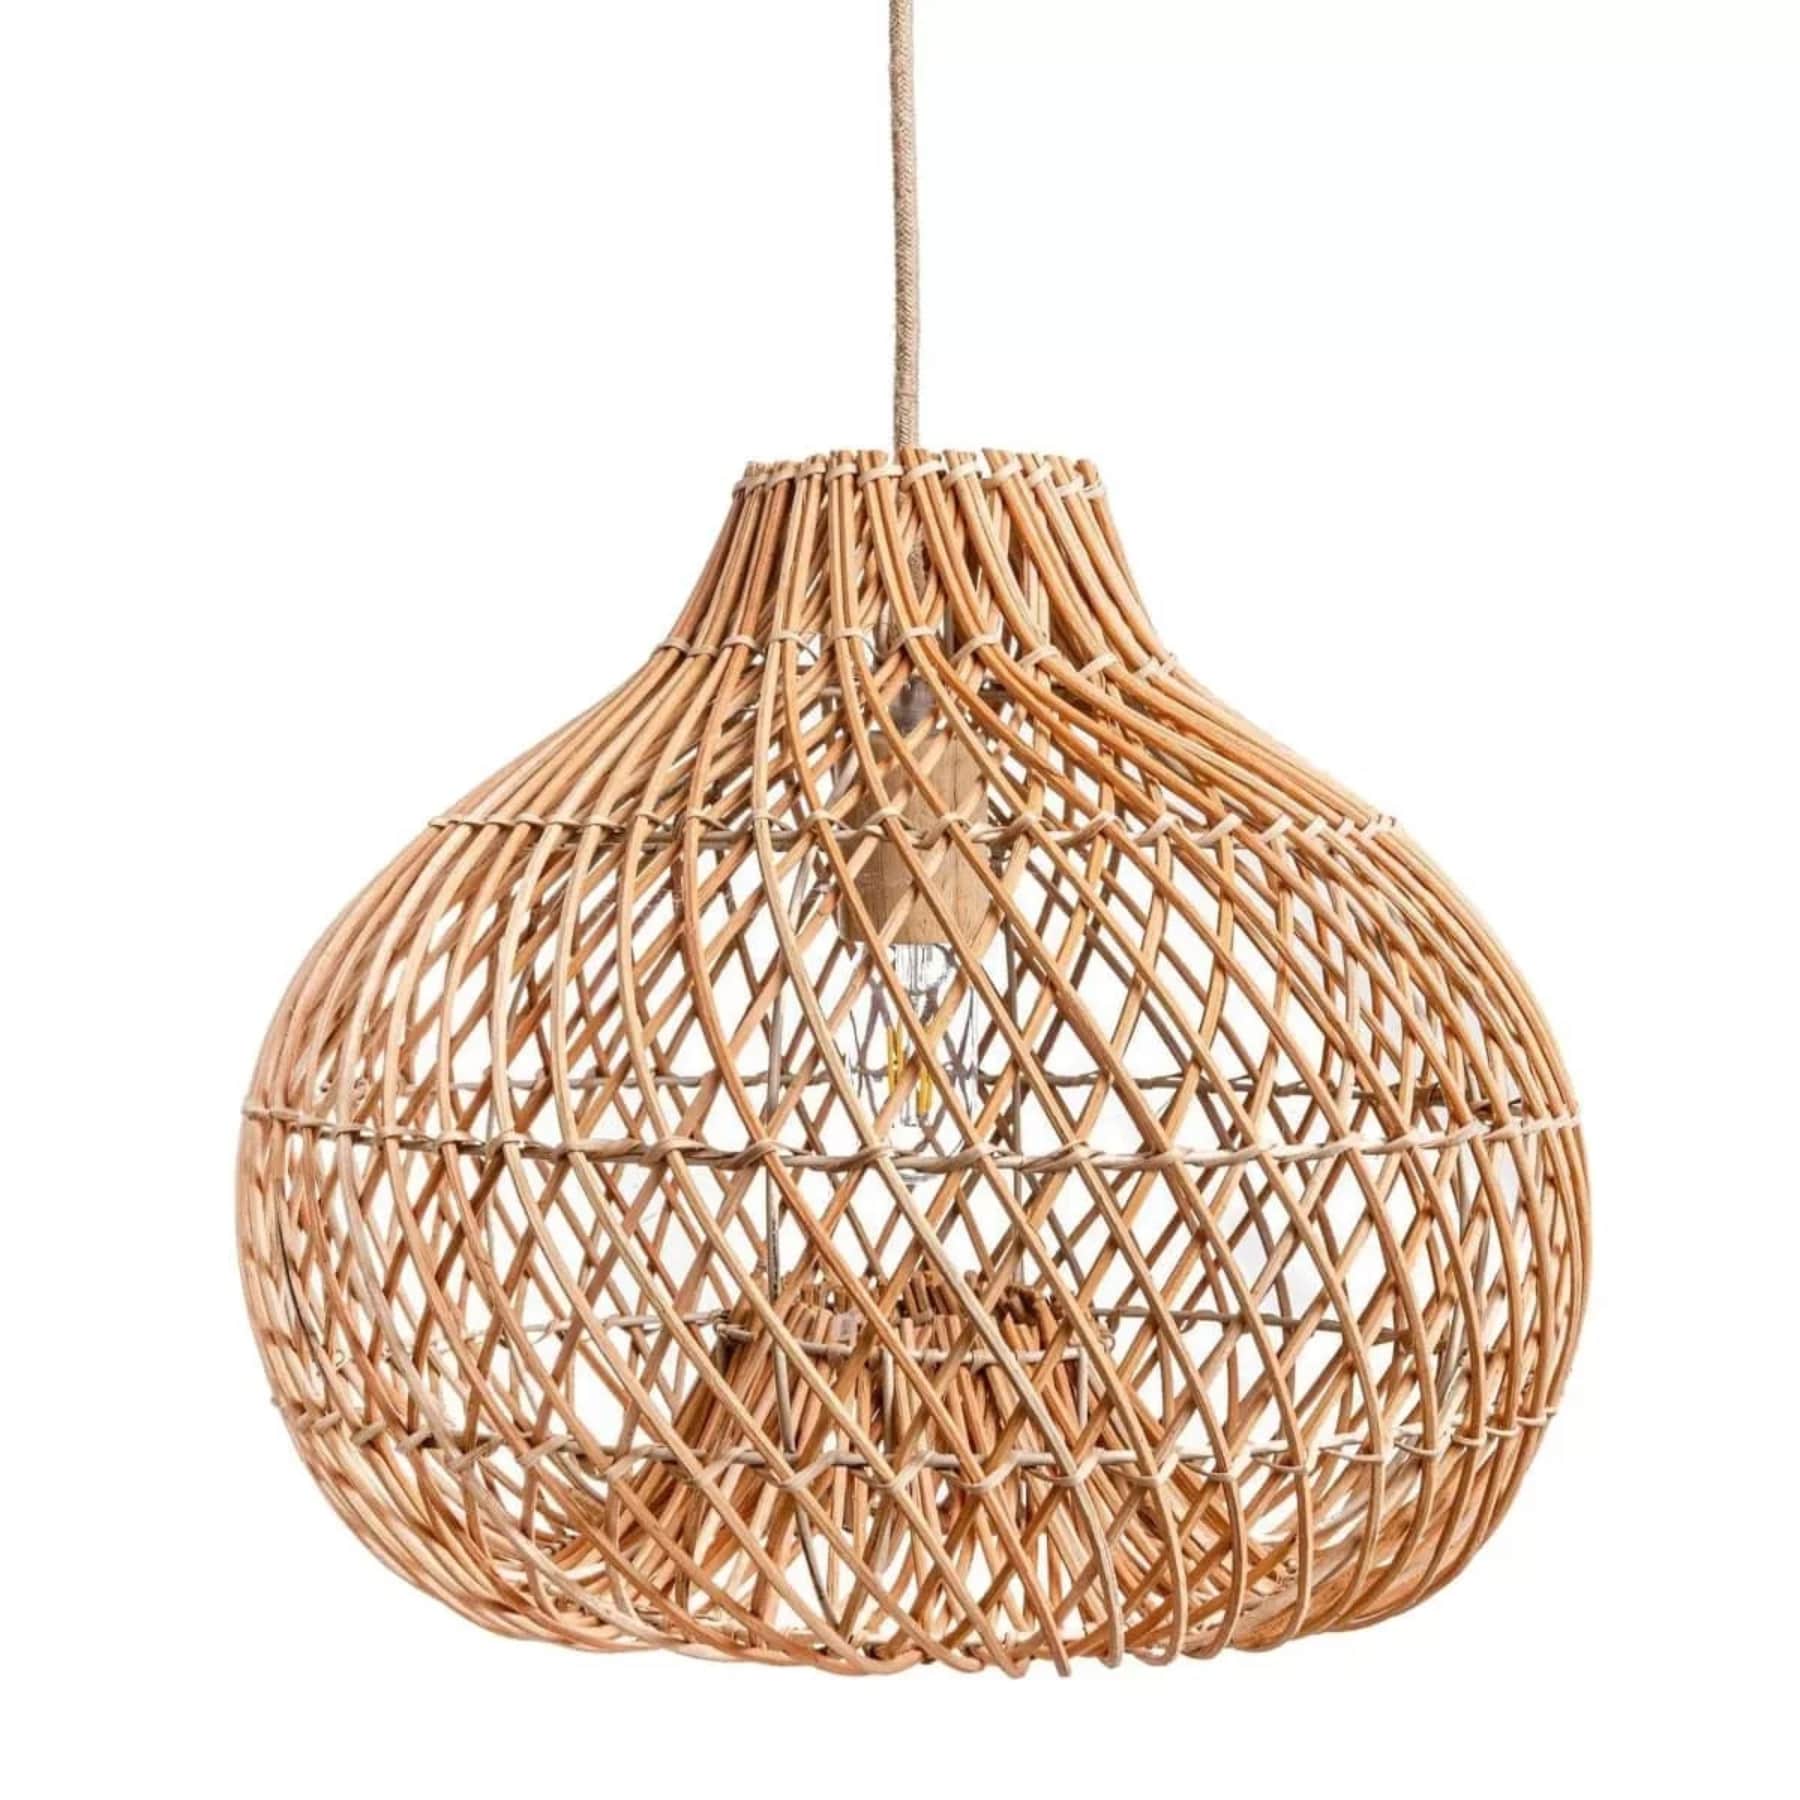 the ombra dome rattan hanging lamp is handcrafted from woven sugarcane